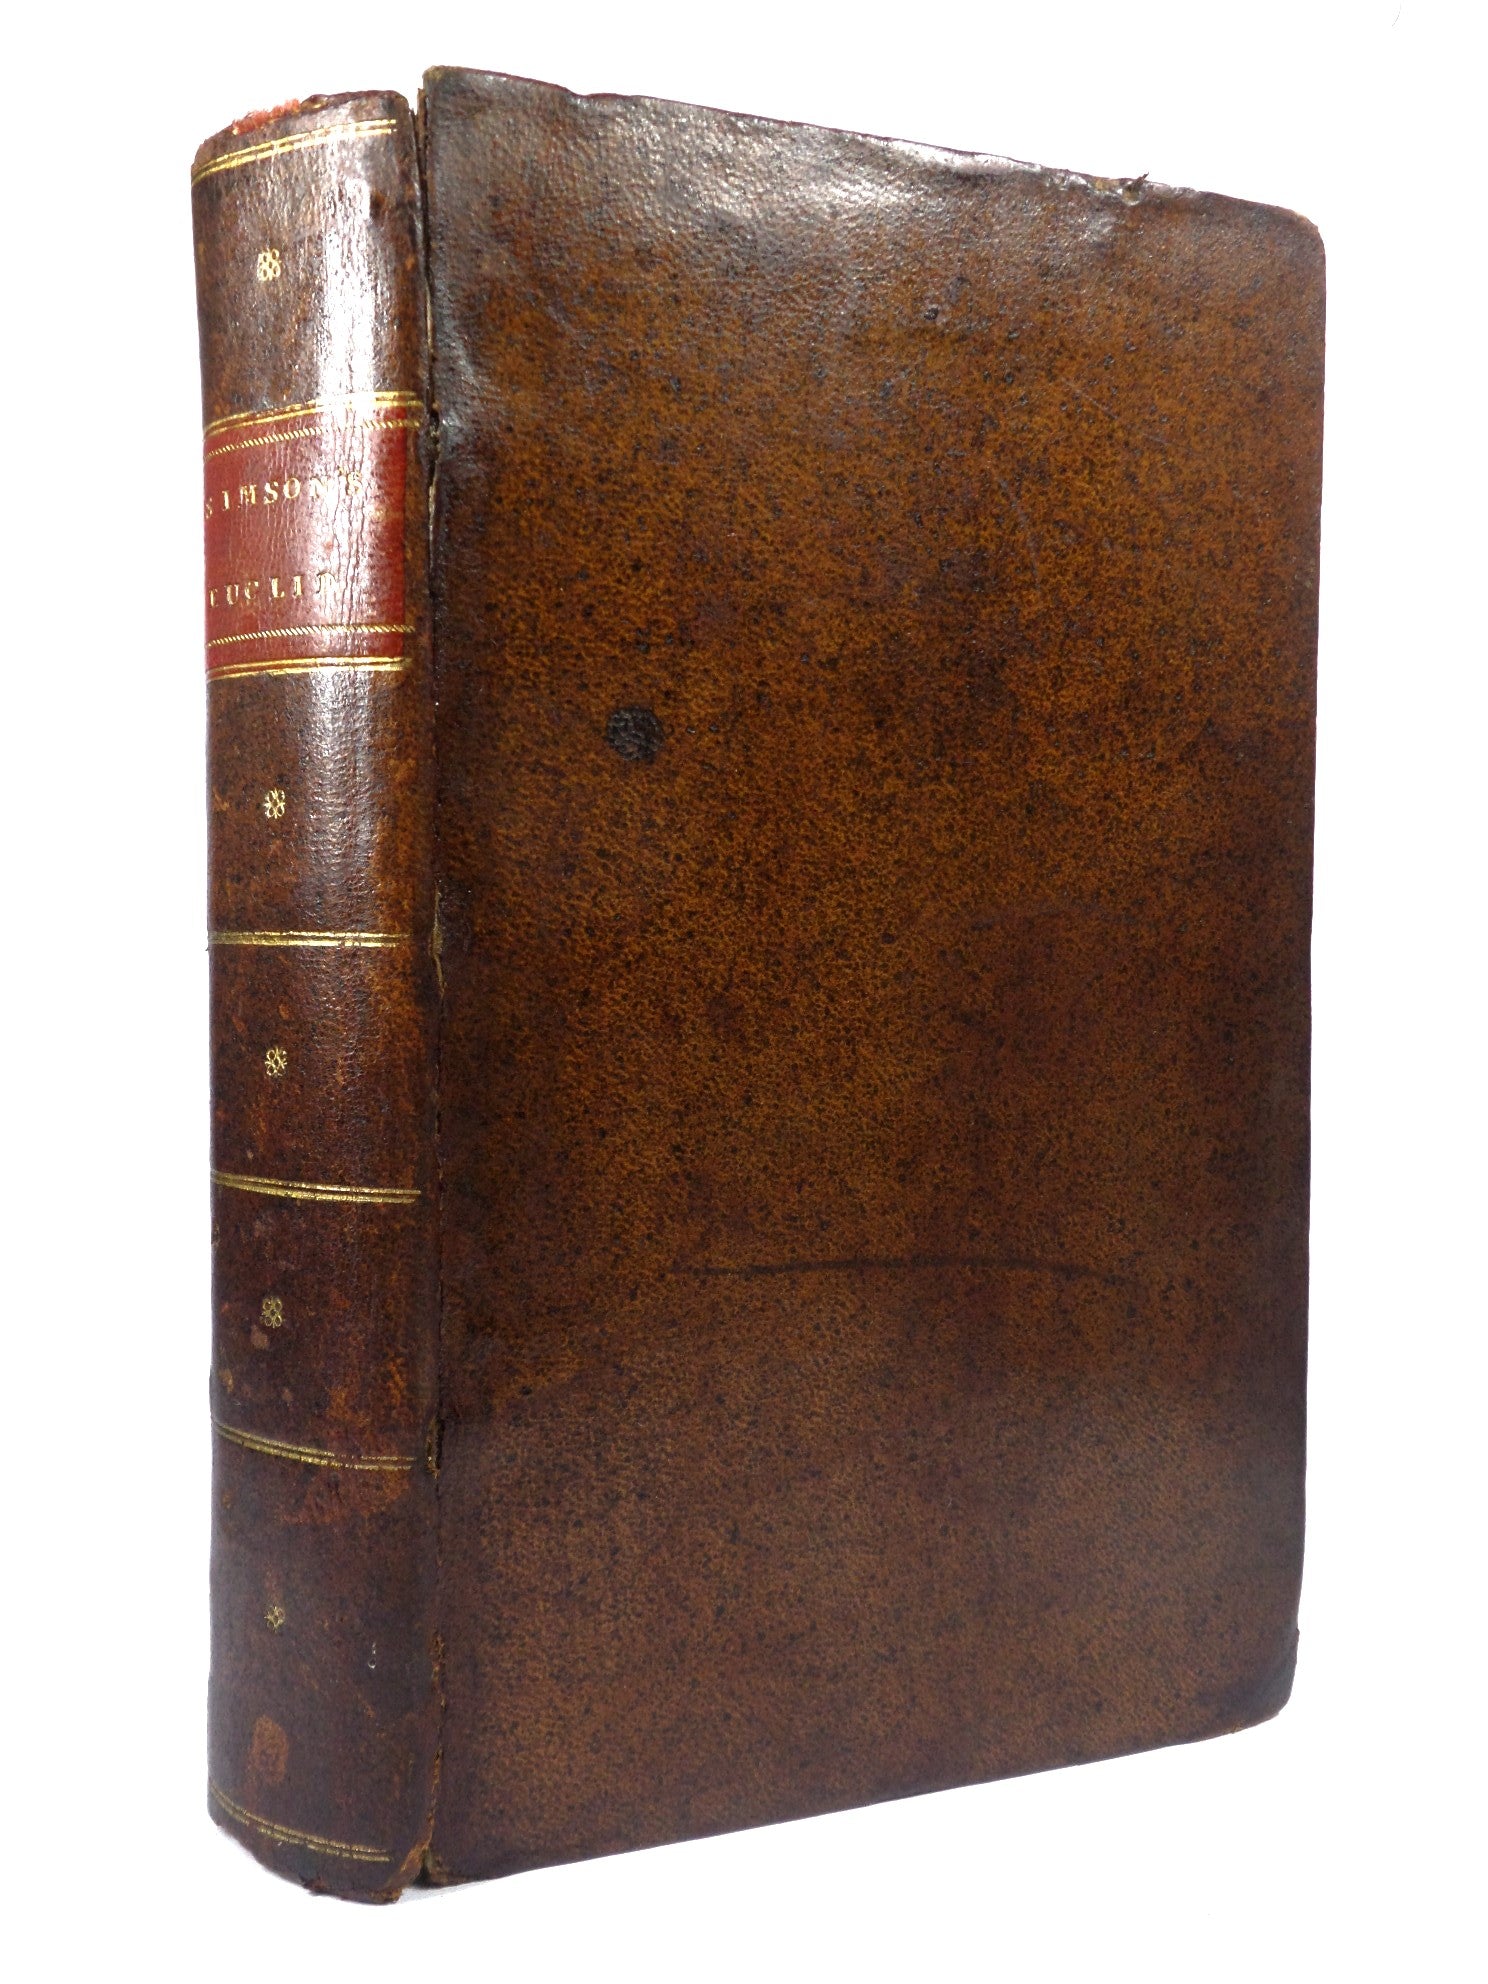 THE ELEMENTS OF EUCLID BY ROBERT SIMSON 1806 LEATHER BINDING